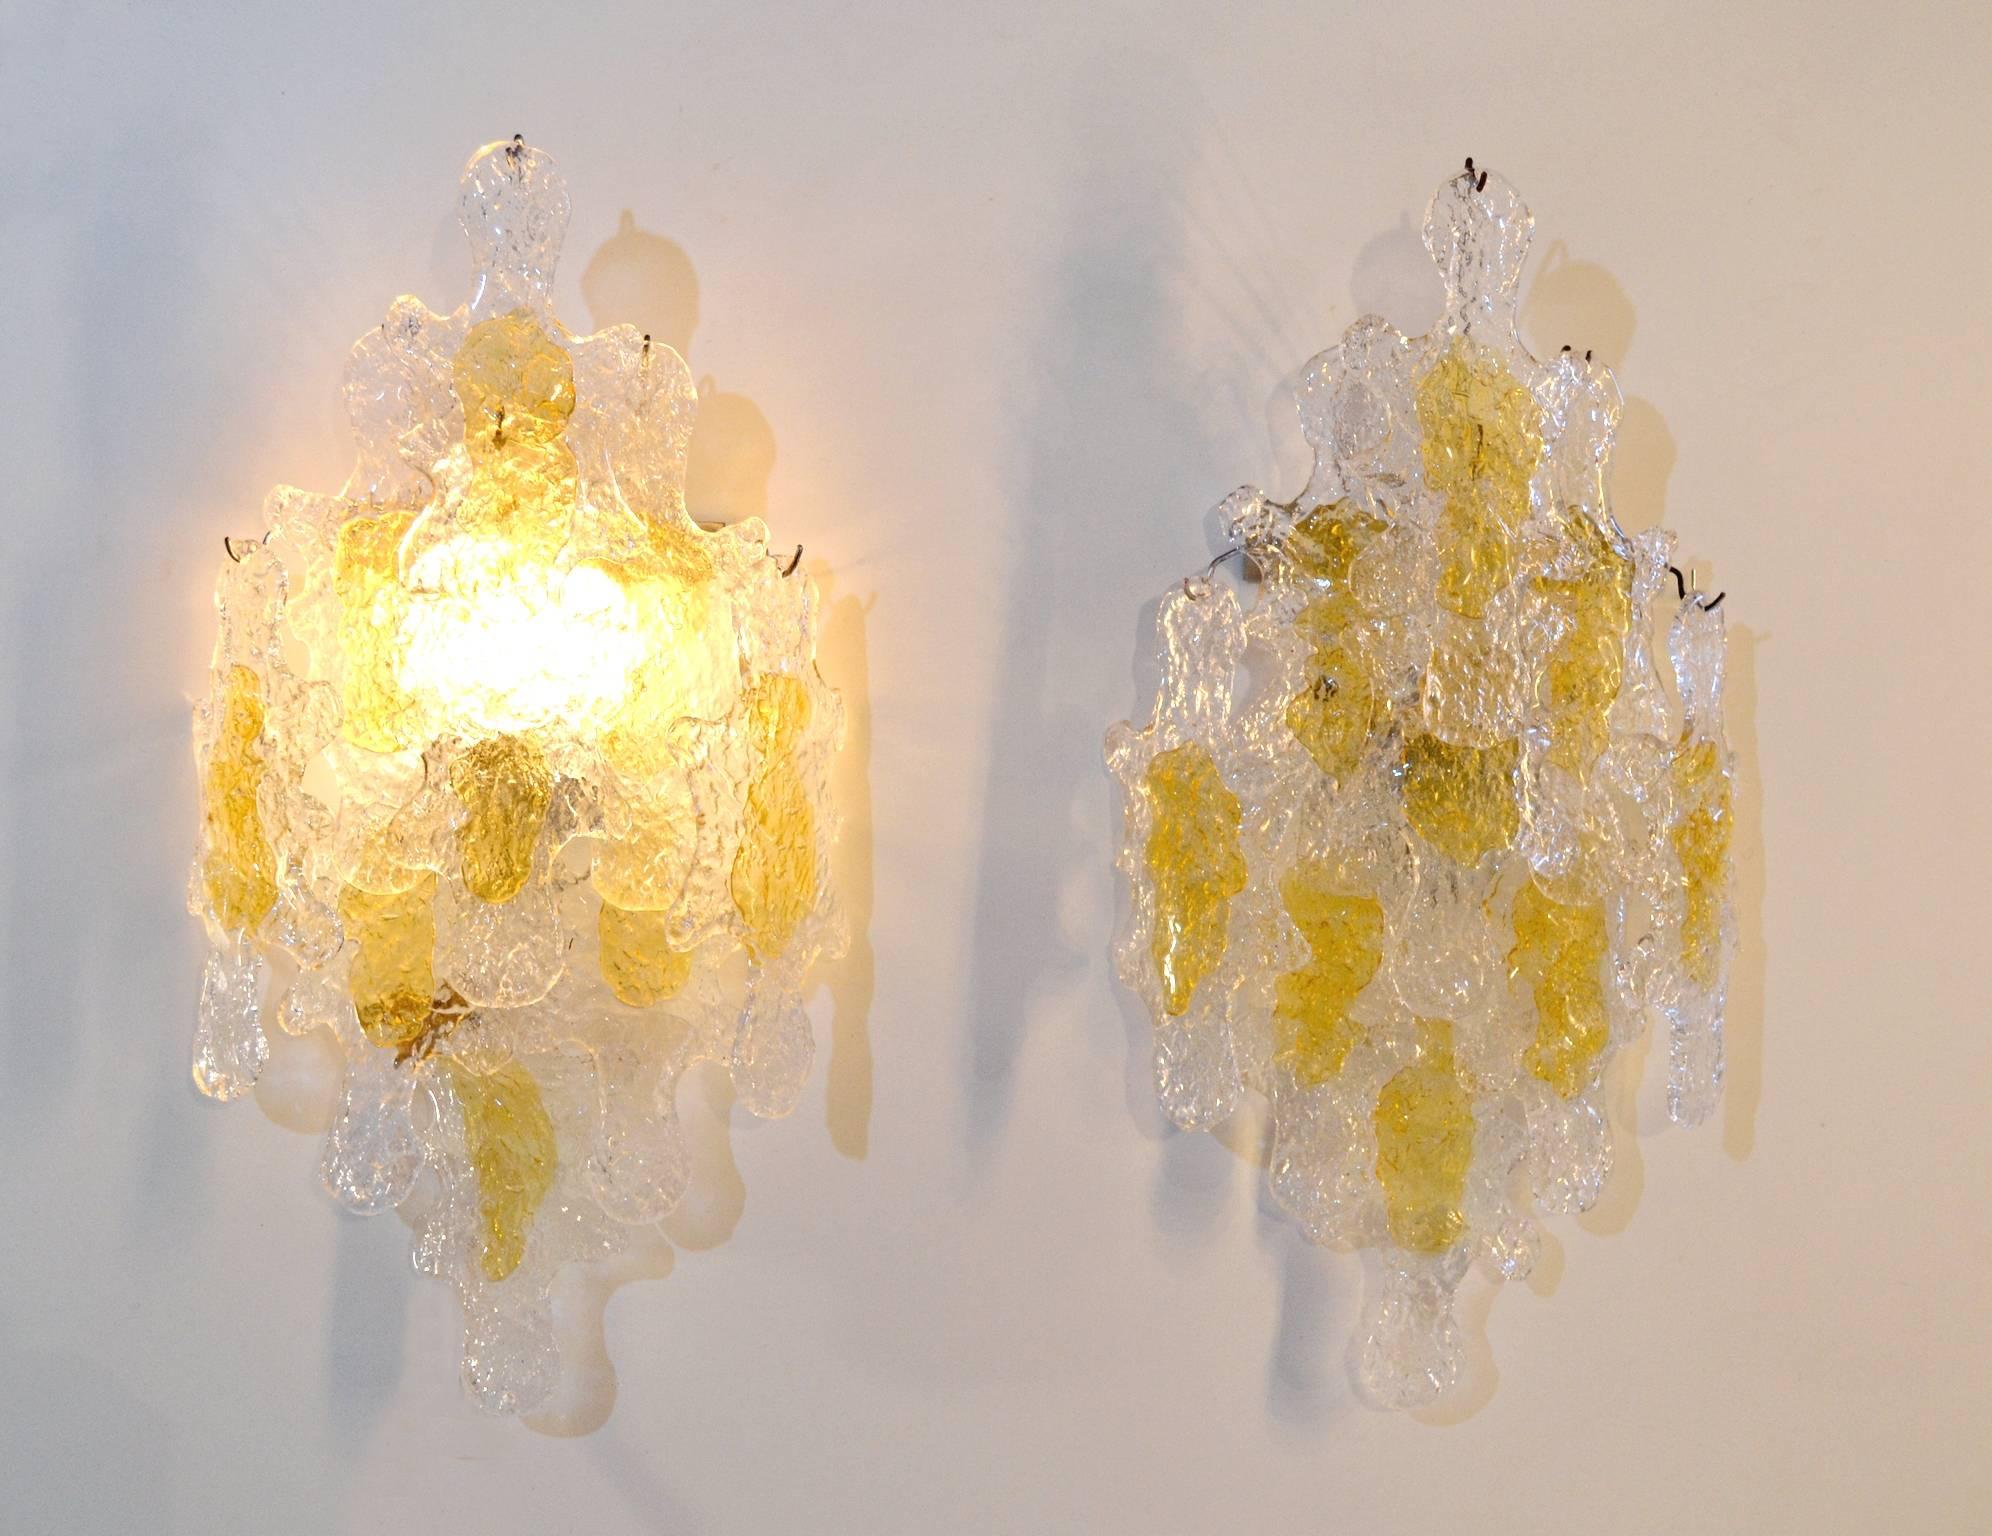 Pair of extra-large wall sconces by Mazzega, Italy. Each sconce contains large pieces of clear and yellow glass. Excellent condition and delivered with extra discs. These wall sconces comes from old stock and has never been in use.